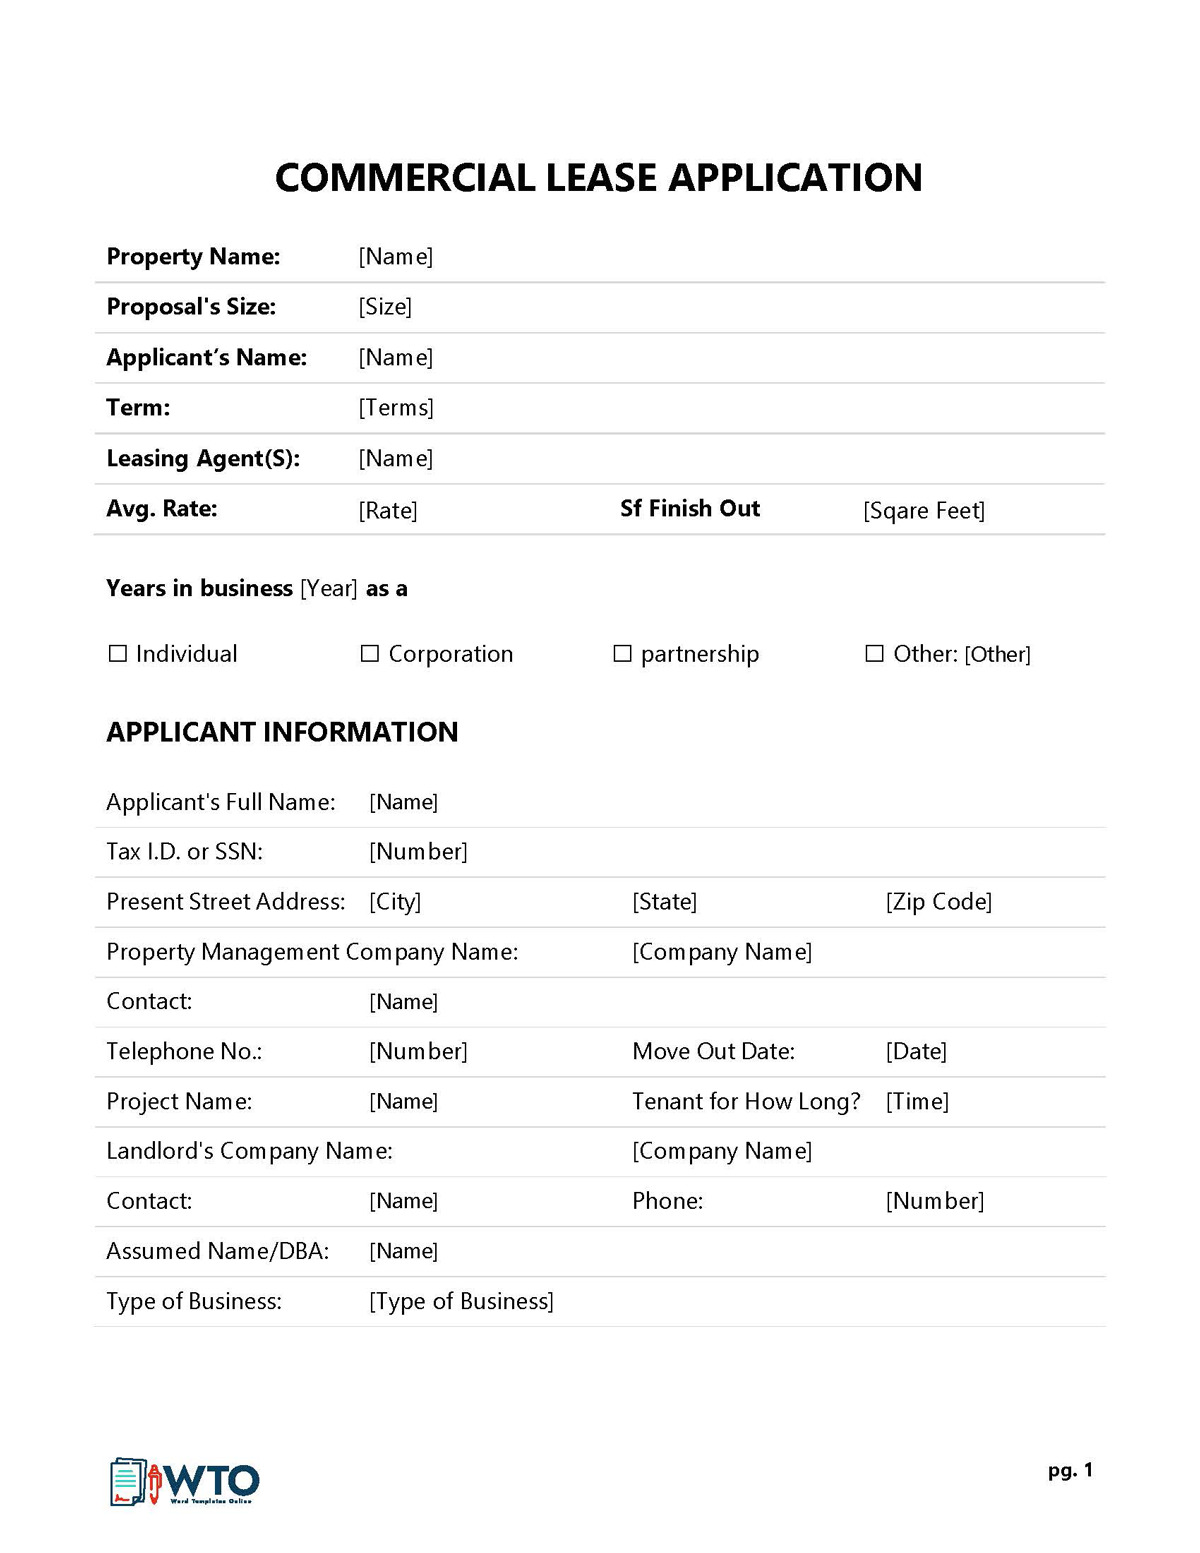 Downloadable Commercial Lease Application Template - Word Format